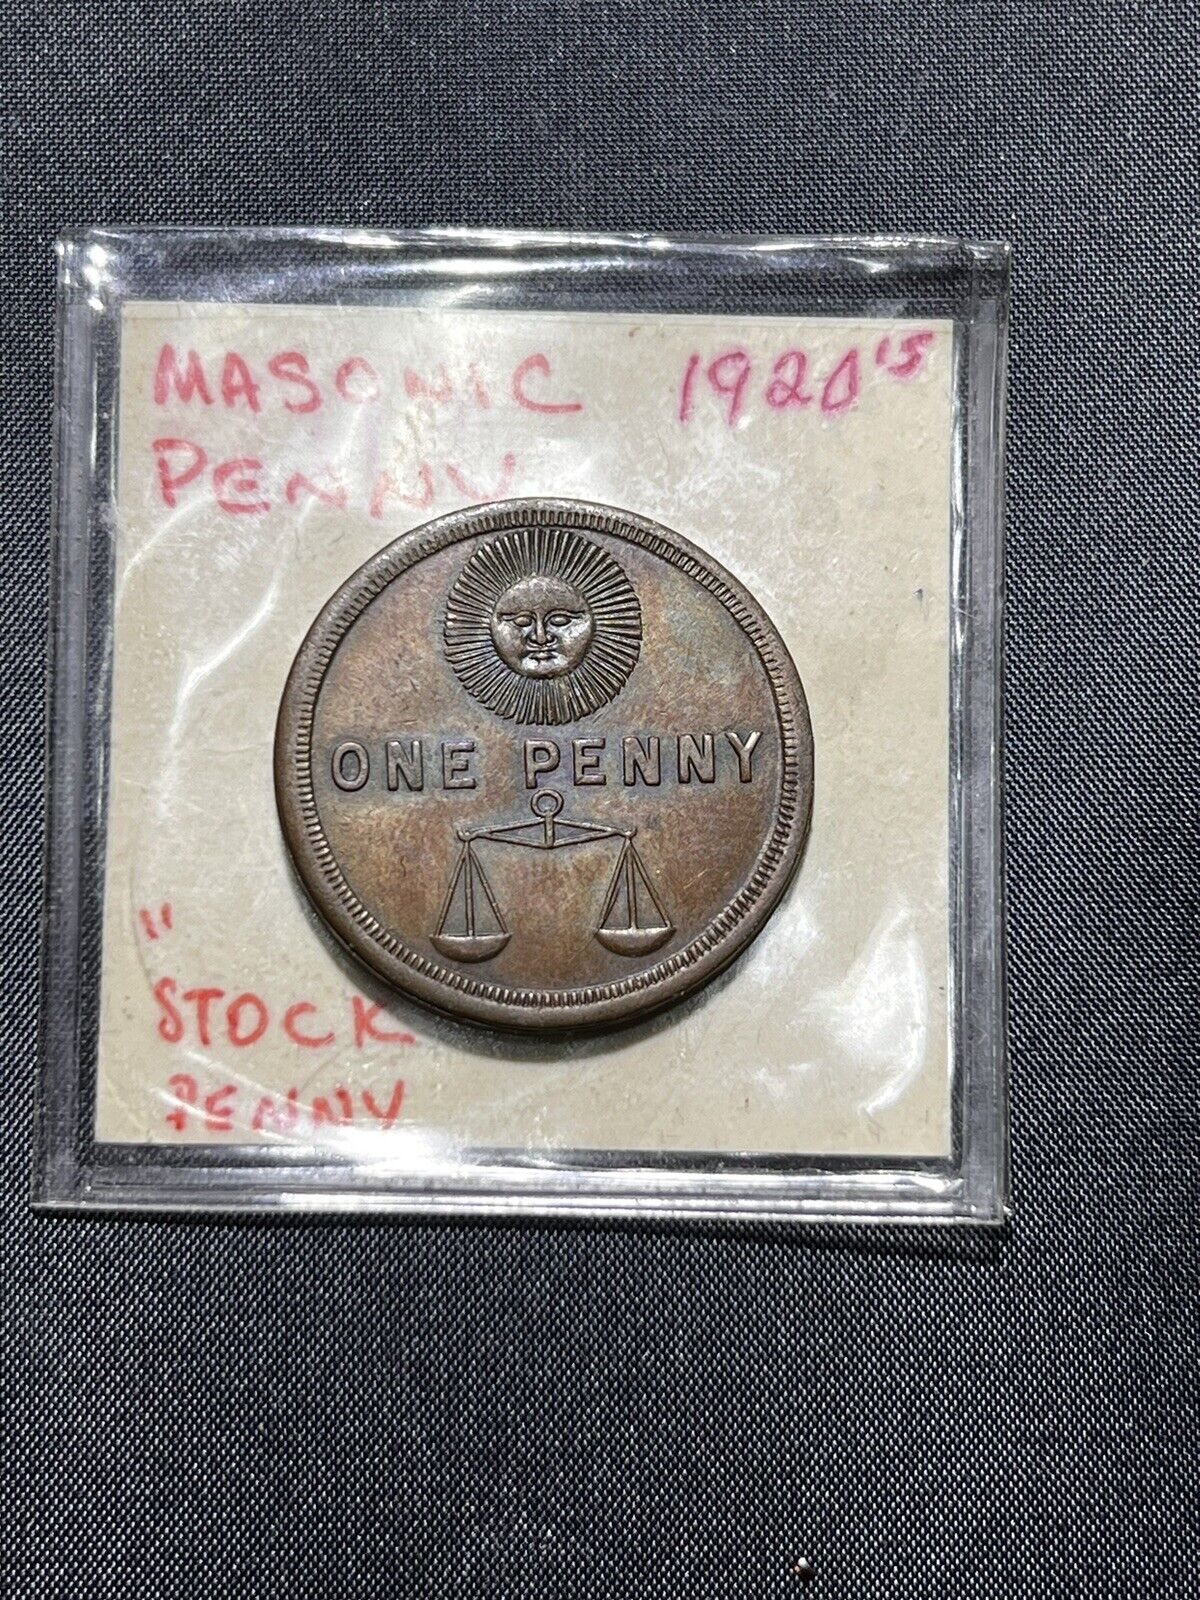 1920’s VINTAGE MASONIC  RAM ONE PENNY  TOKEN COIN